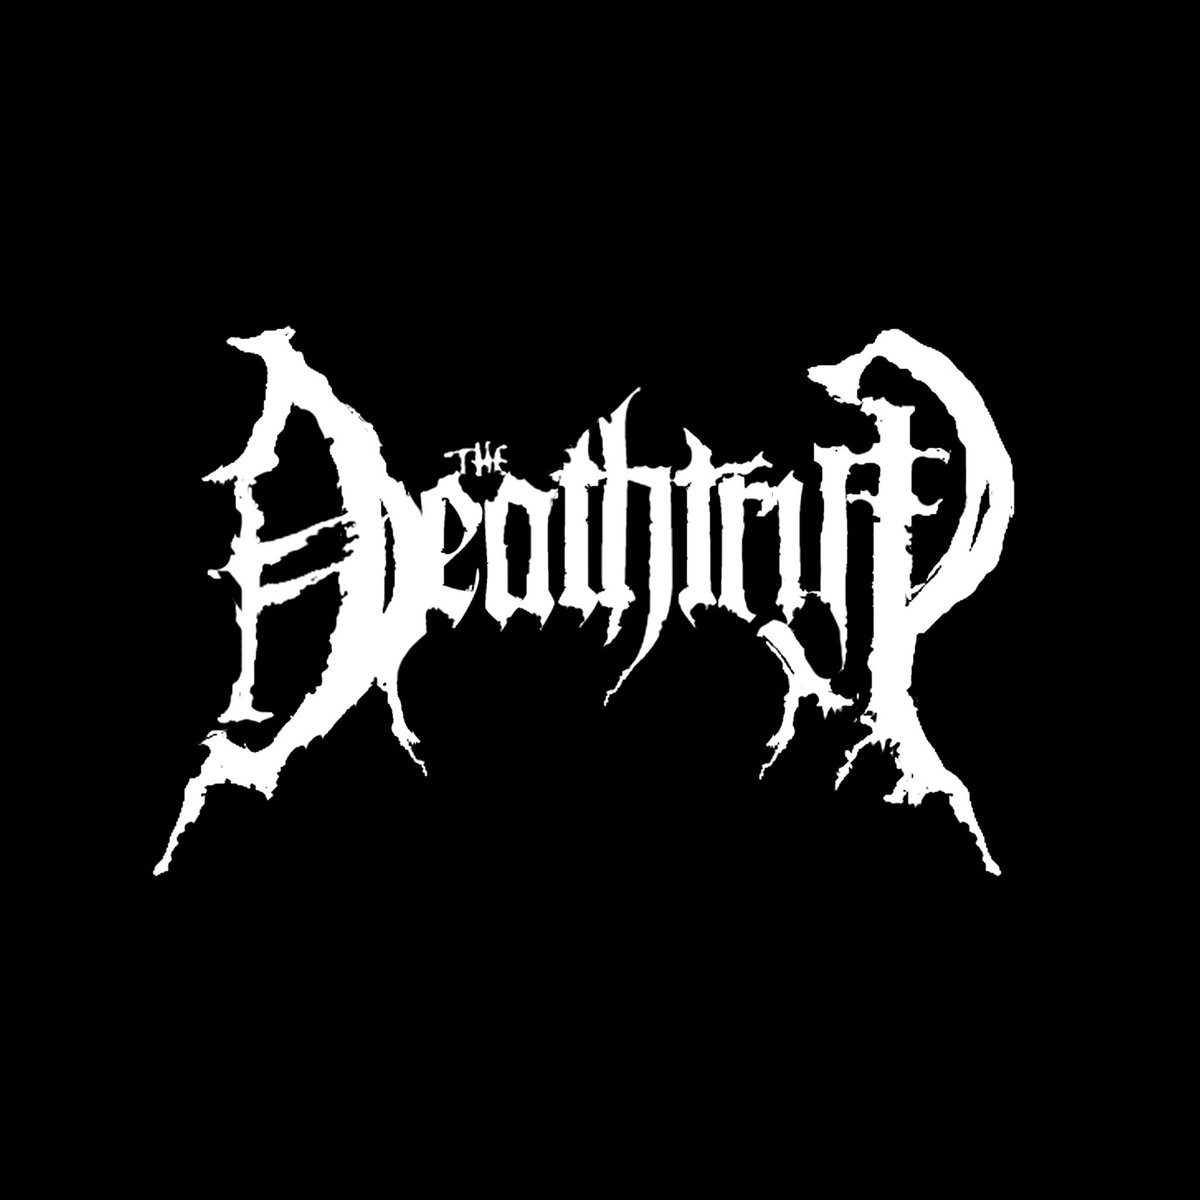 Cult Black Metal band The Deathtrip sign to Svart Records (Europe)/Profound Lore (North America) and announce new album, Demon Solar Totem, to be released on November 15th 2019. New lineup and and band photo revealed. #svartrecords #deatthtrip #profoundlore #demonsolartotem